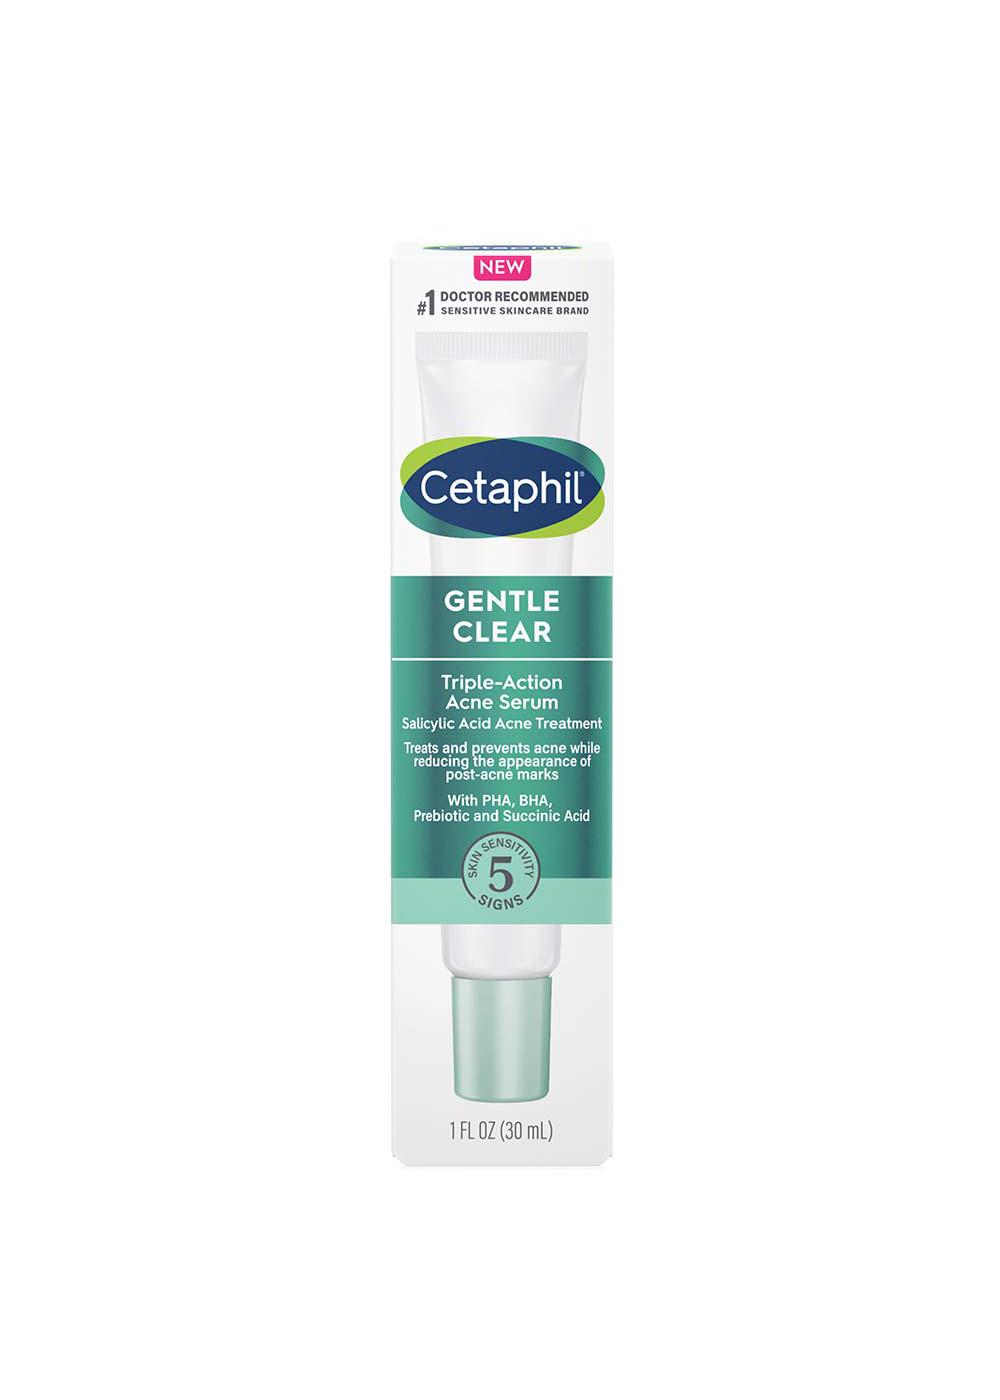 Cetaphil Gentle Clear Triple-Action Acne Serum; image 1 of 4